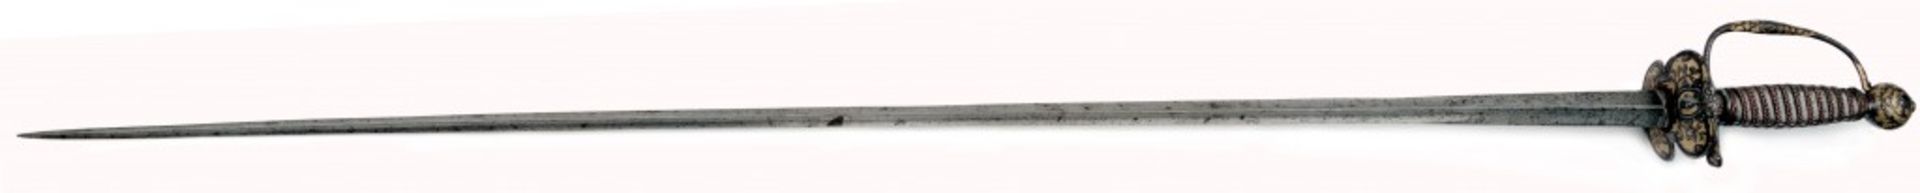 A French Gilt Small-sword with Chiselled Hilt by Jean Louis Guyon the Elder - Image 9 of 11